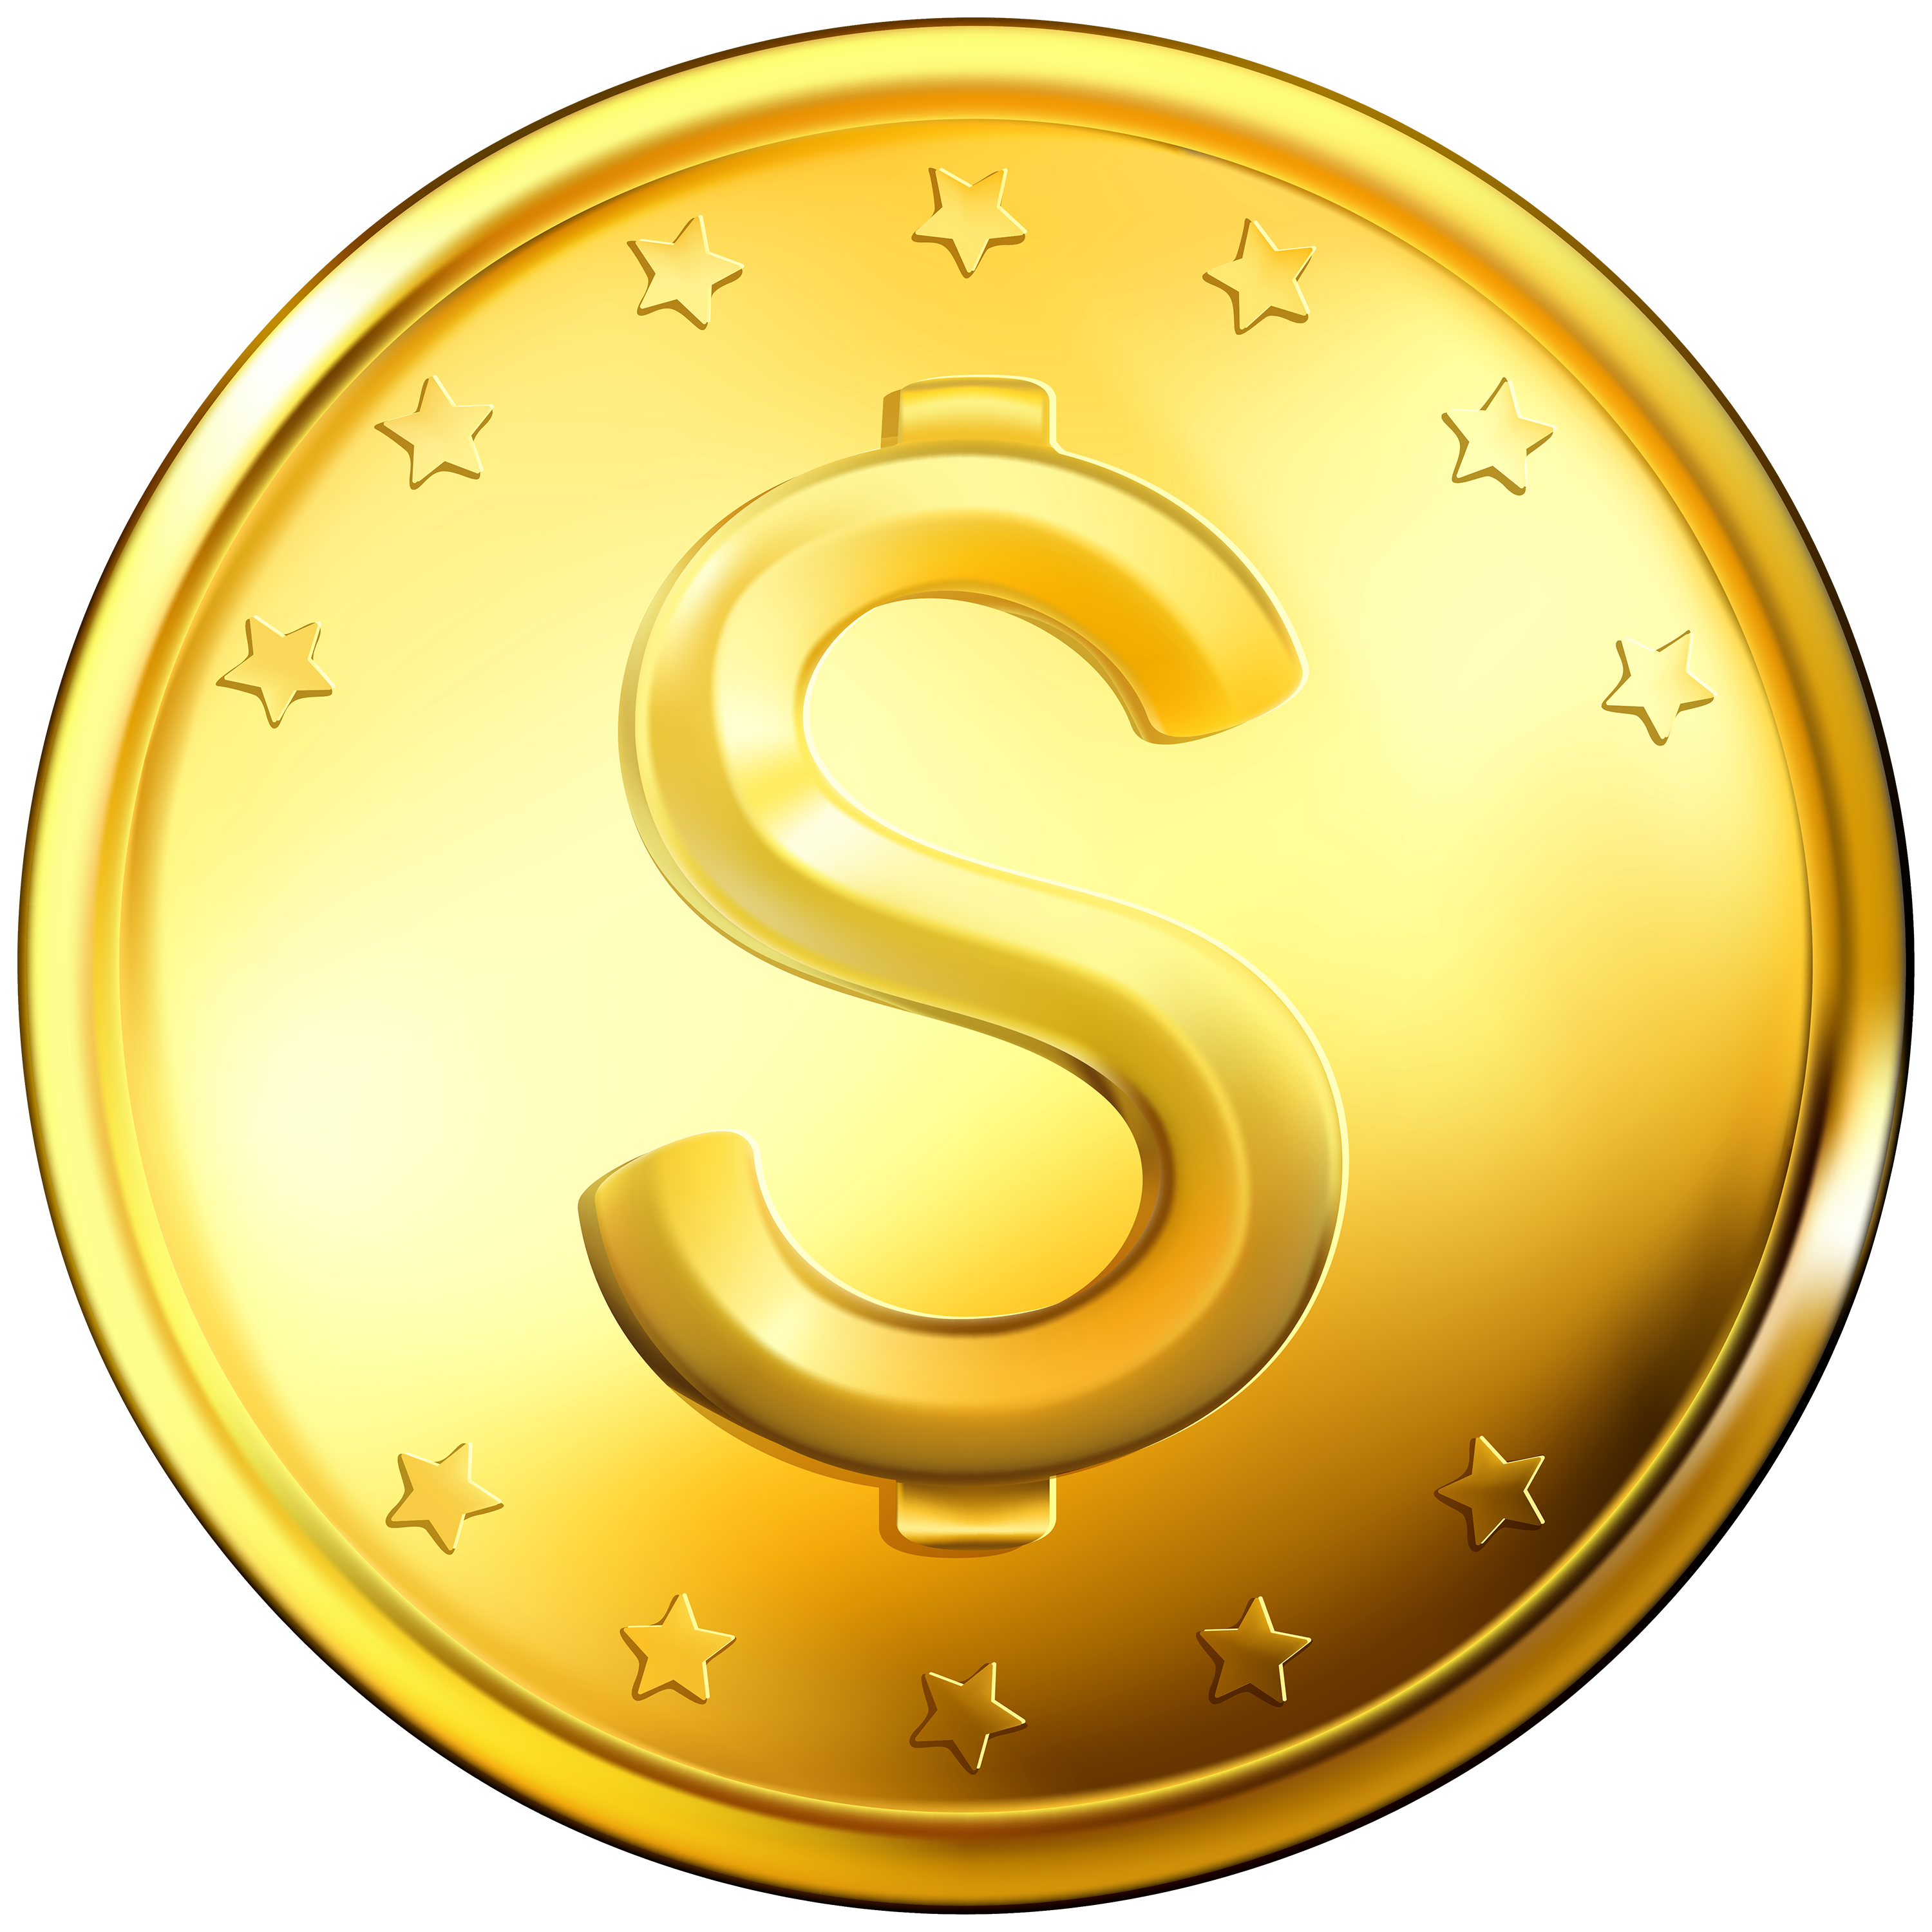 Gold Coins Png Hd Transparent Gold Coins Hdpng Images Pluspng